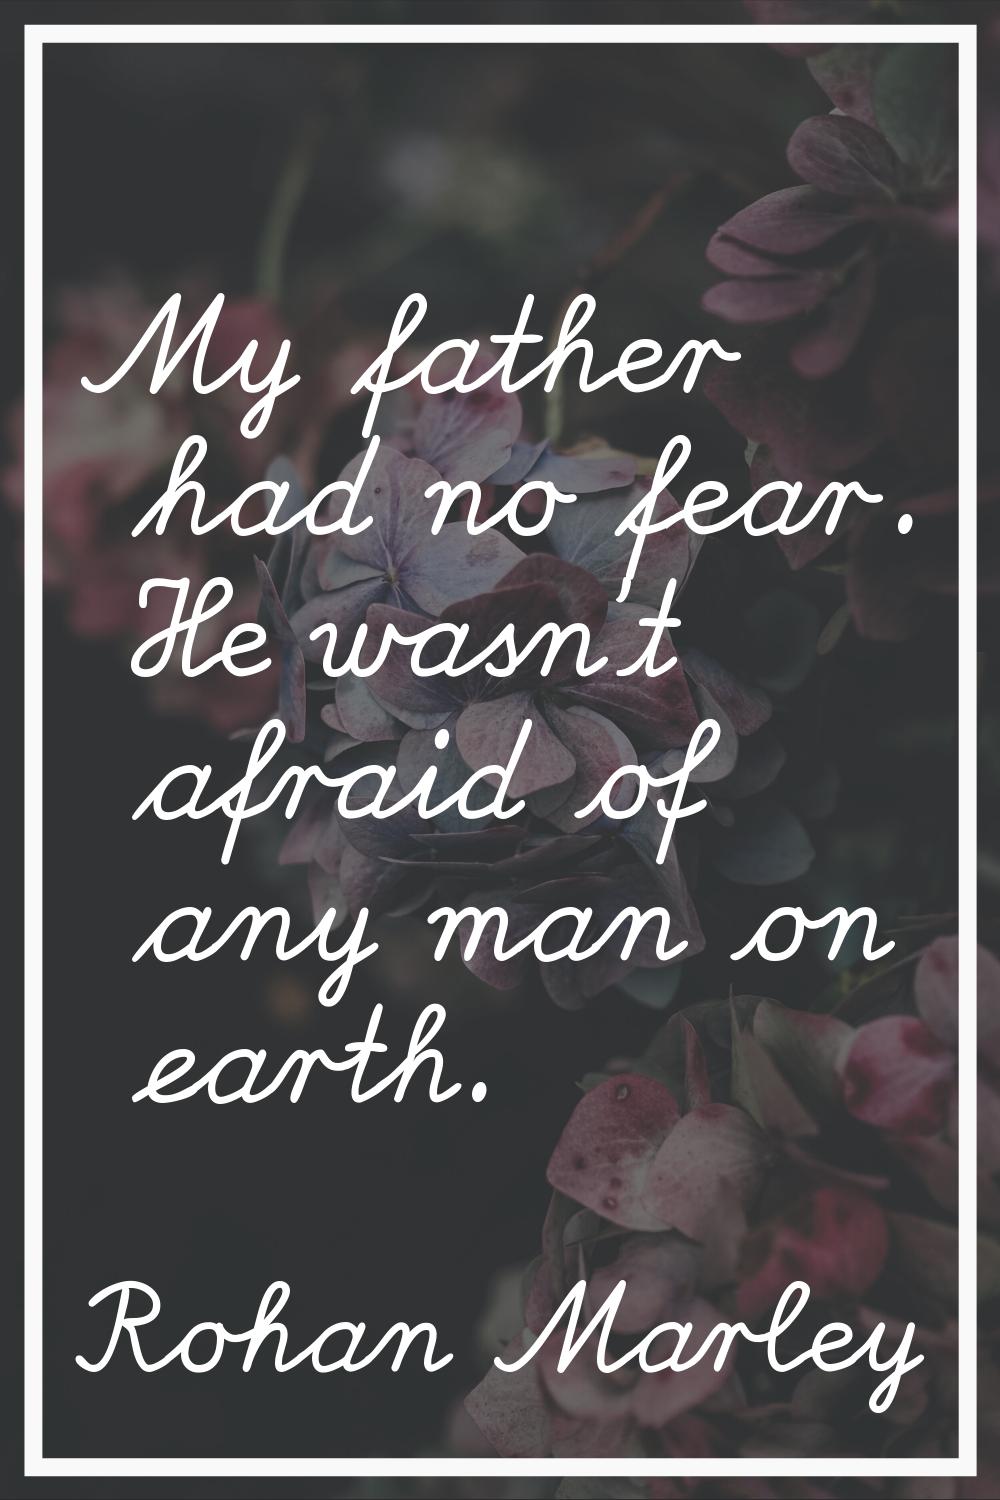 My father had no fear. He wasn't afraid of any man on earth.